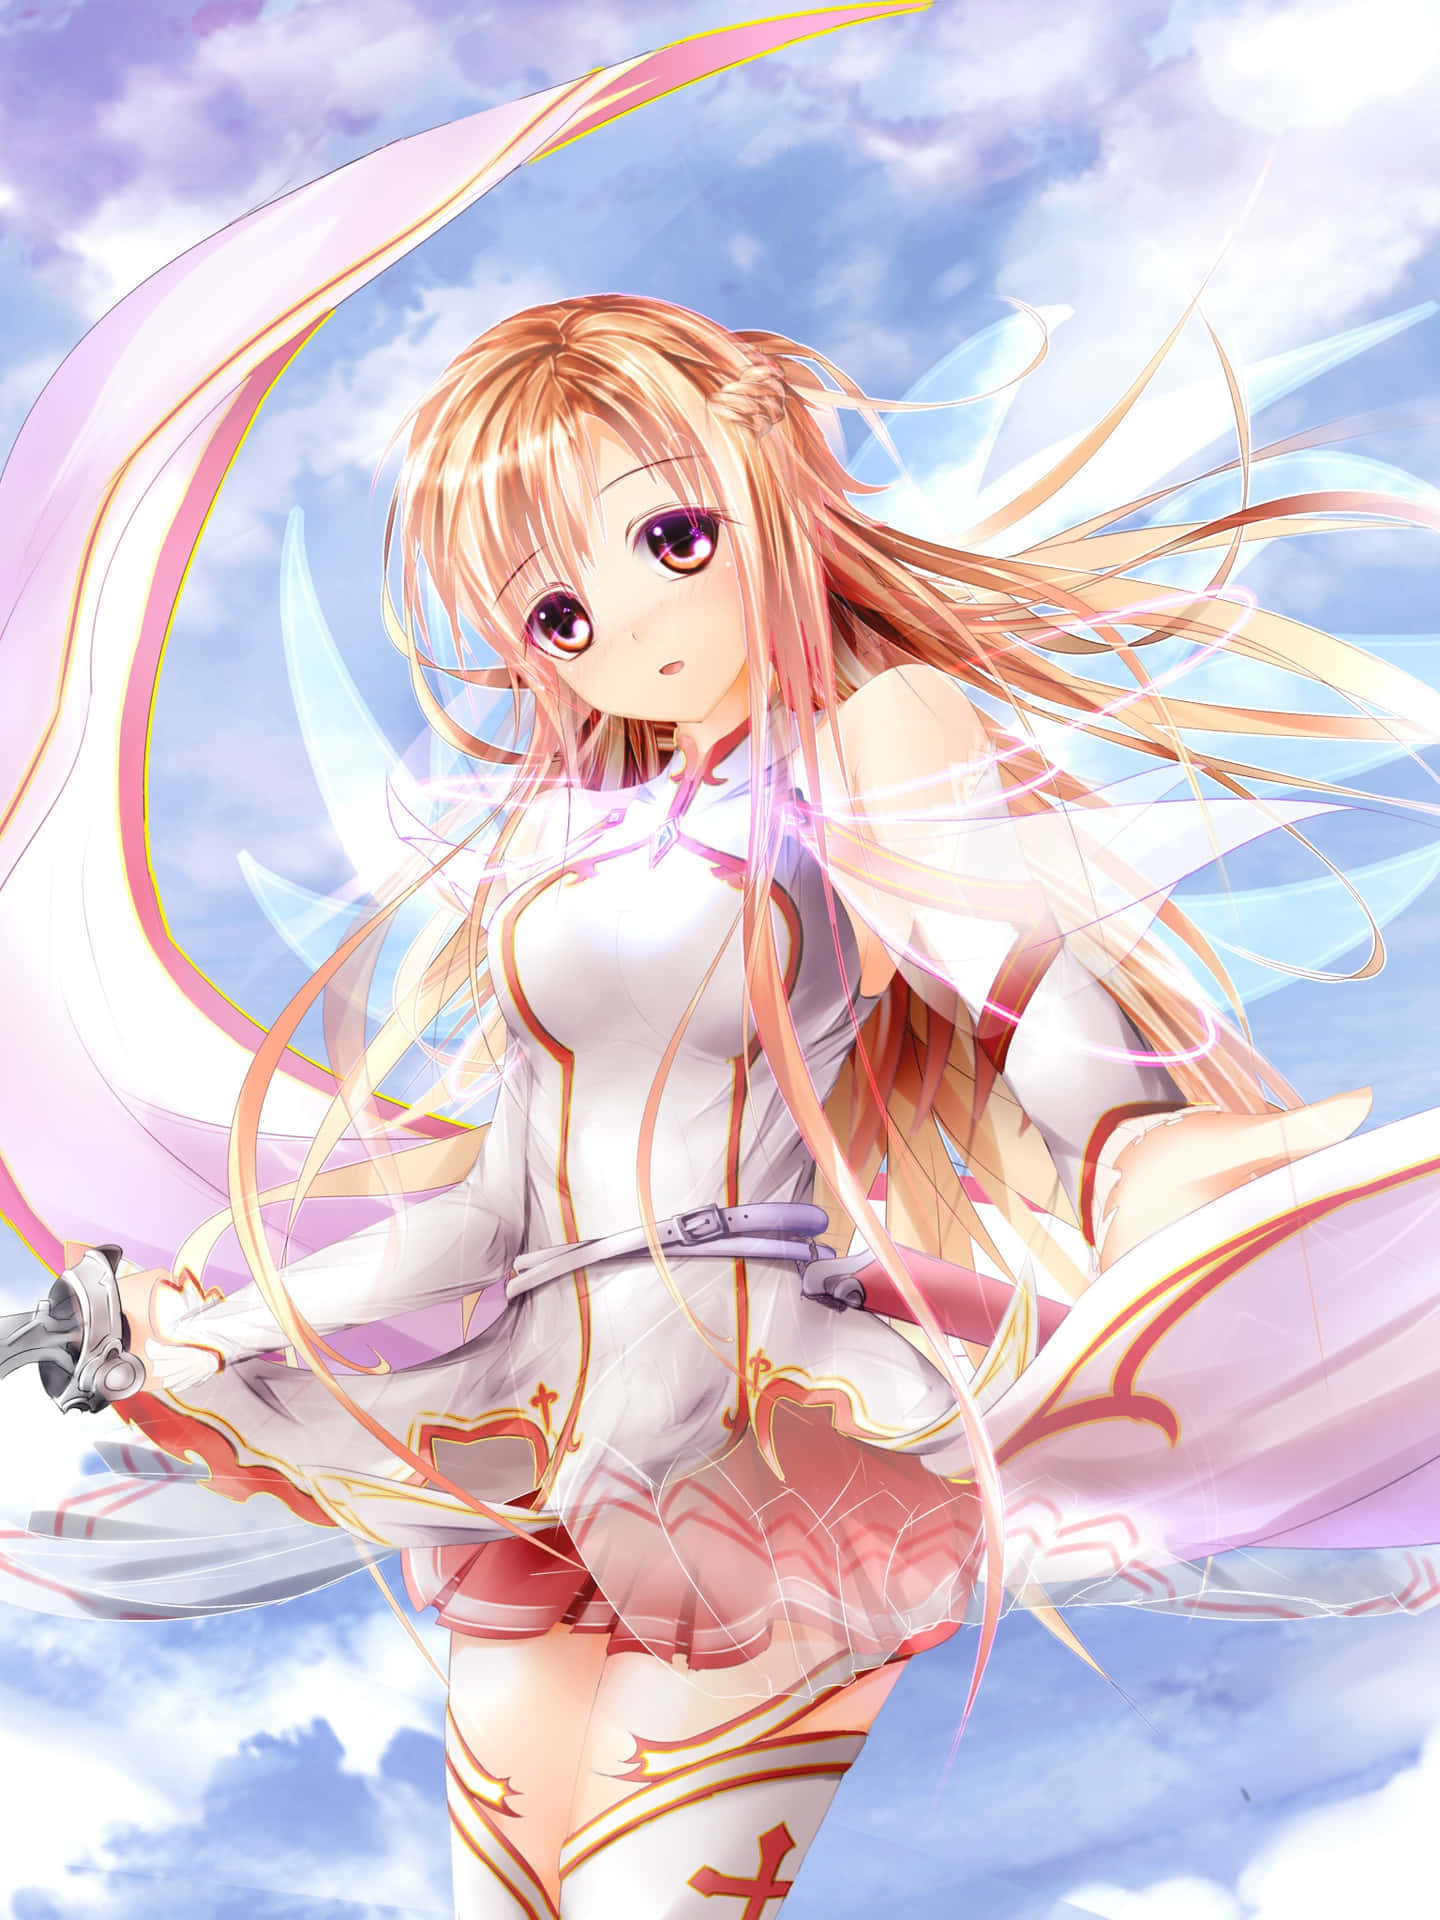 A Girl With Long Blonde Hair And Wings Flying In The Sky Wallpaper